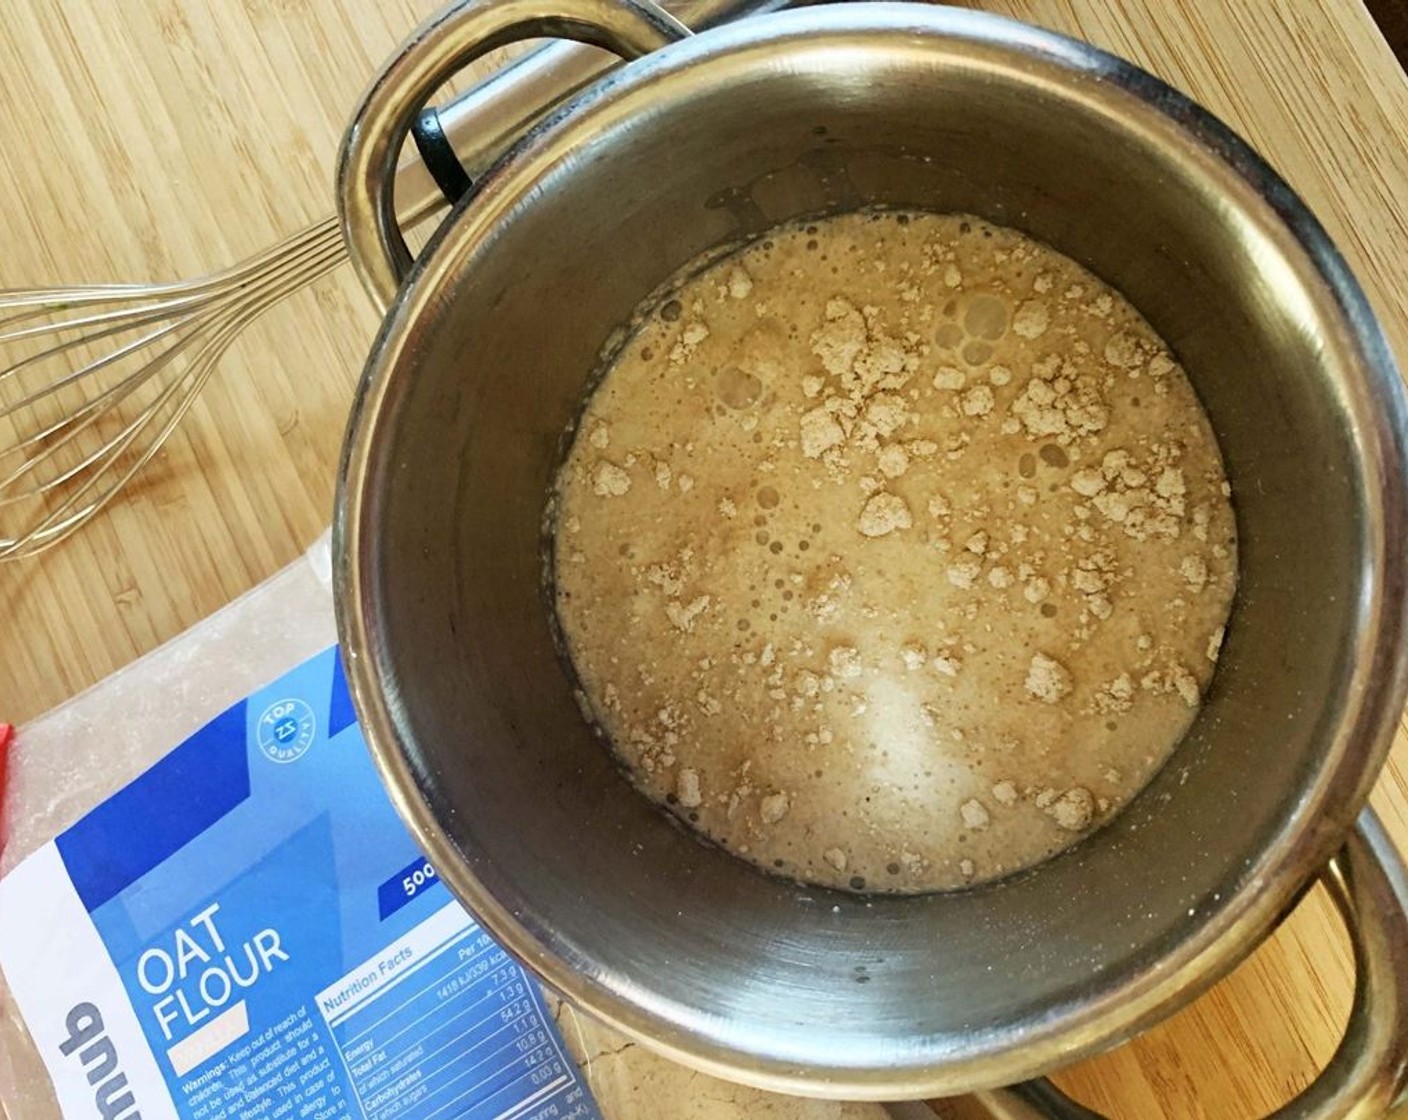 step 1 In a small saucepan, place Oat Flour (2 1/2 Tbsp) and Almond Milk (4 oz).